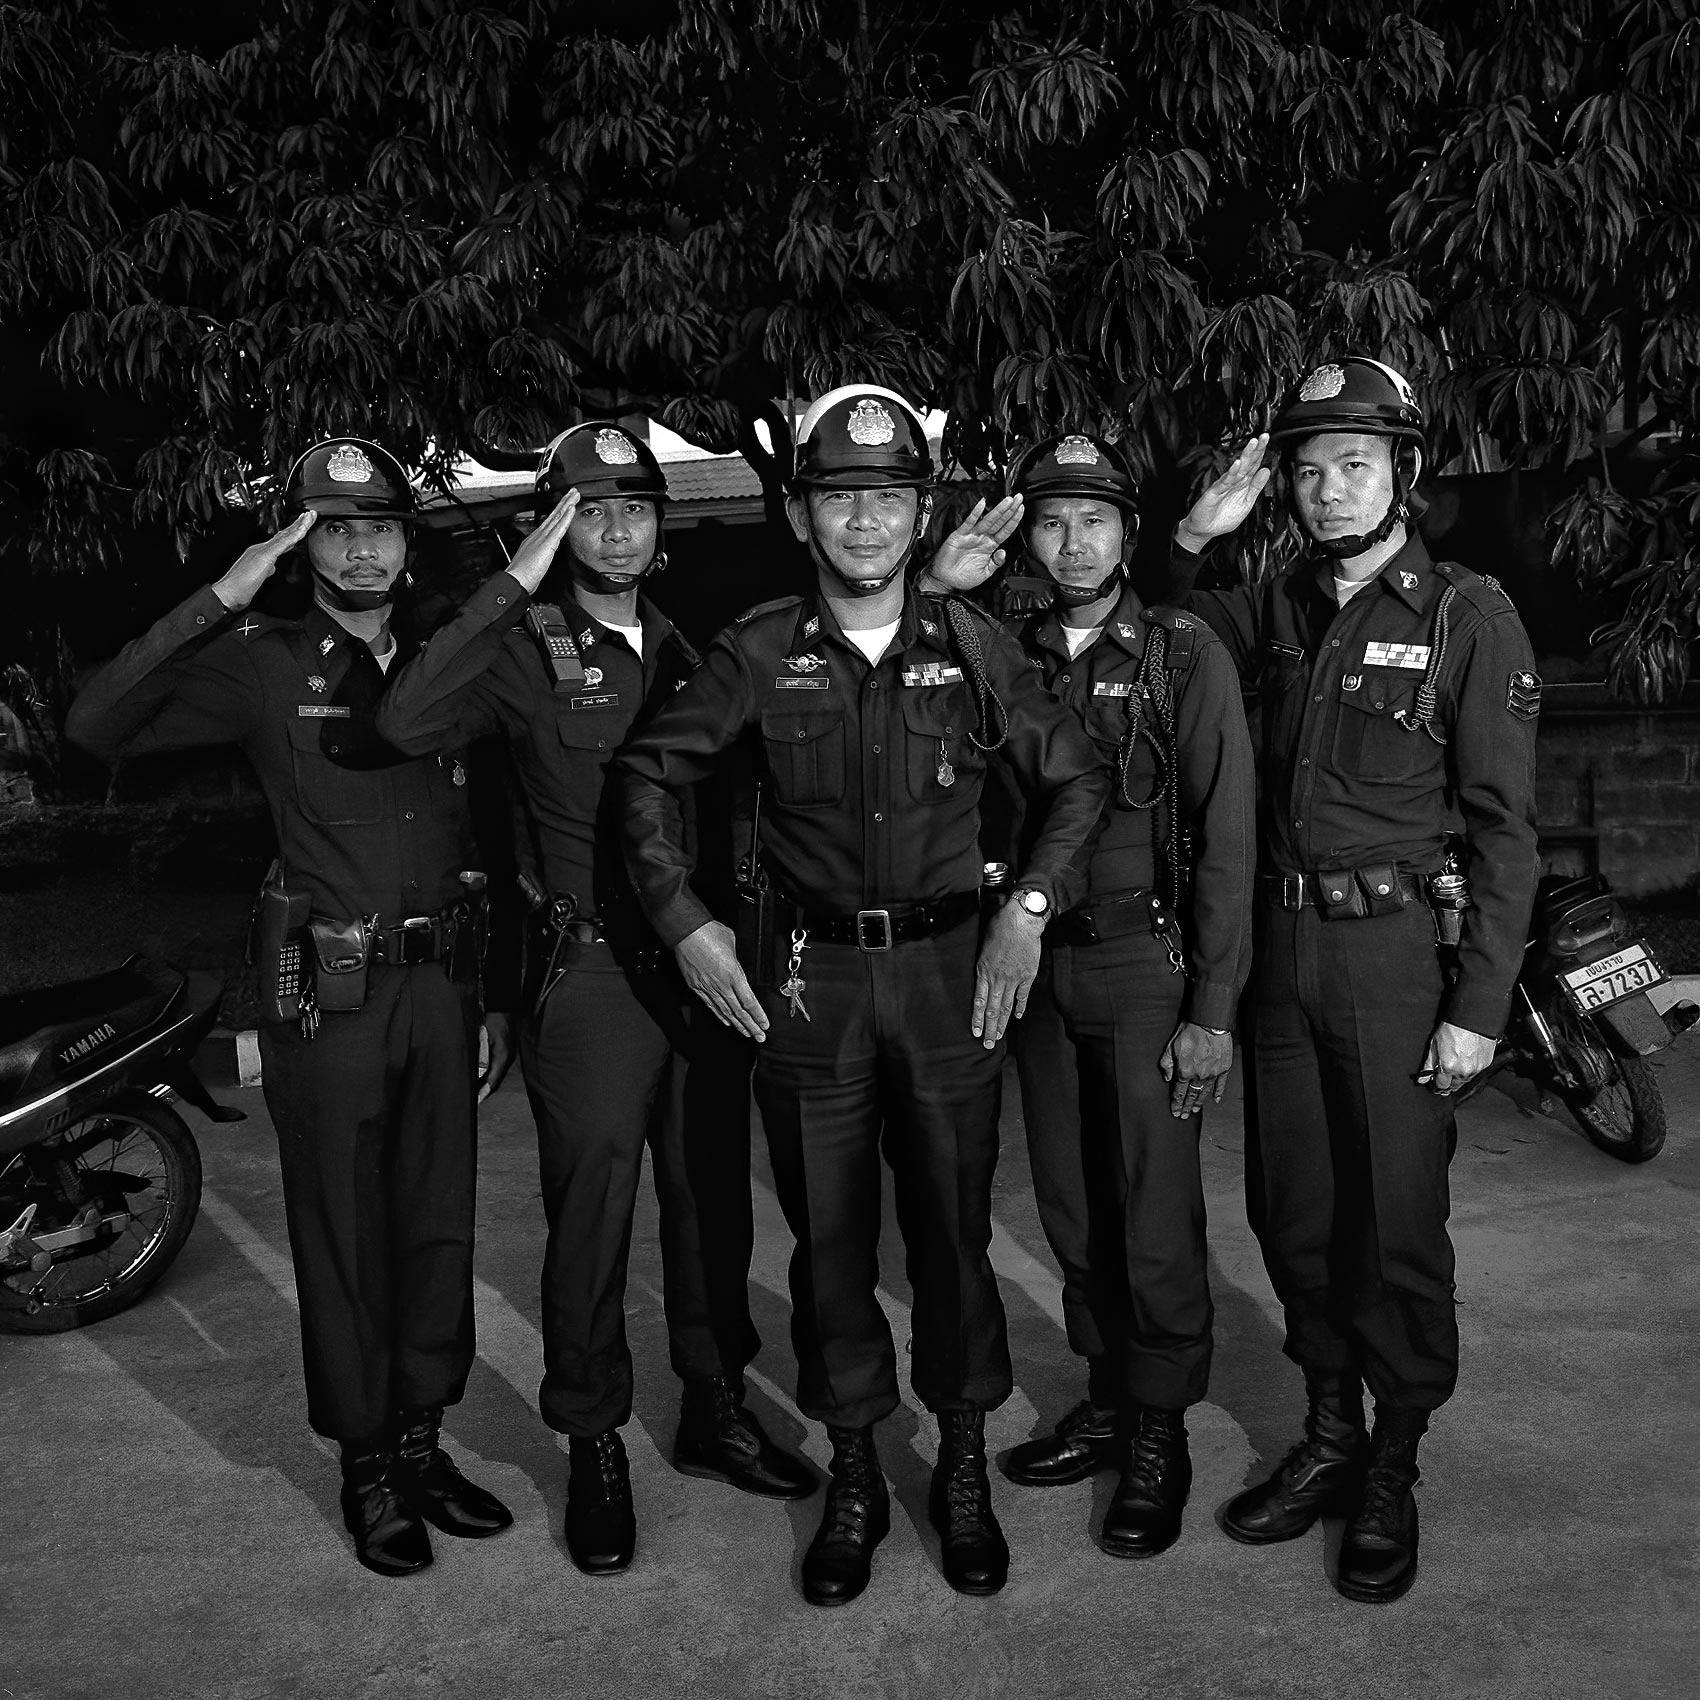 a-group-of-thai-police-officers-salute-while-posing-for-a-photo-in-bangkok